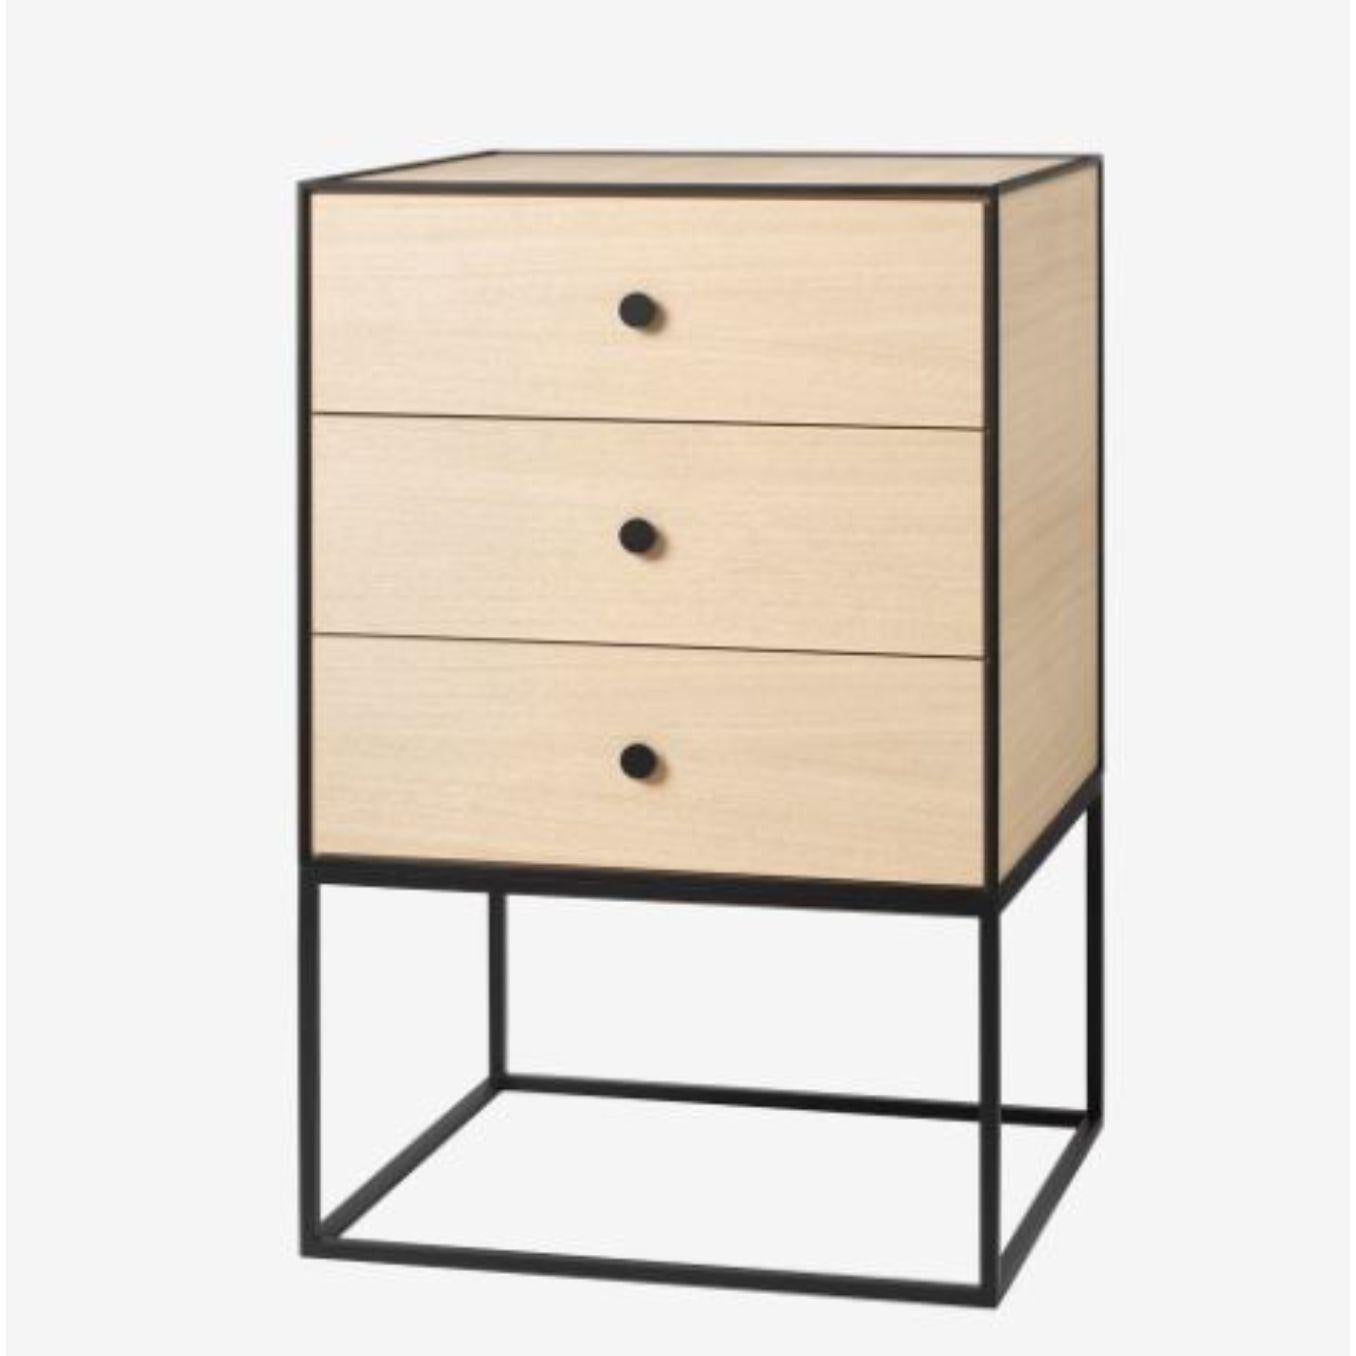 49 oak frame sideboard with 3 drawers by Lassen
Dimensions: D 49 x W 42 x H 77 cm 
Materials: Finér, Melamin, Melamine, Metal, Veneer, oak
Also available in different colors and dimensions.
Weight: 21 Kg

By Lassen is a Danish design brand